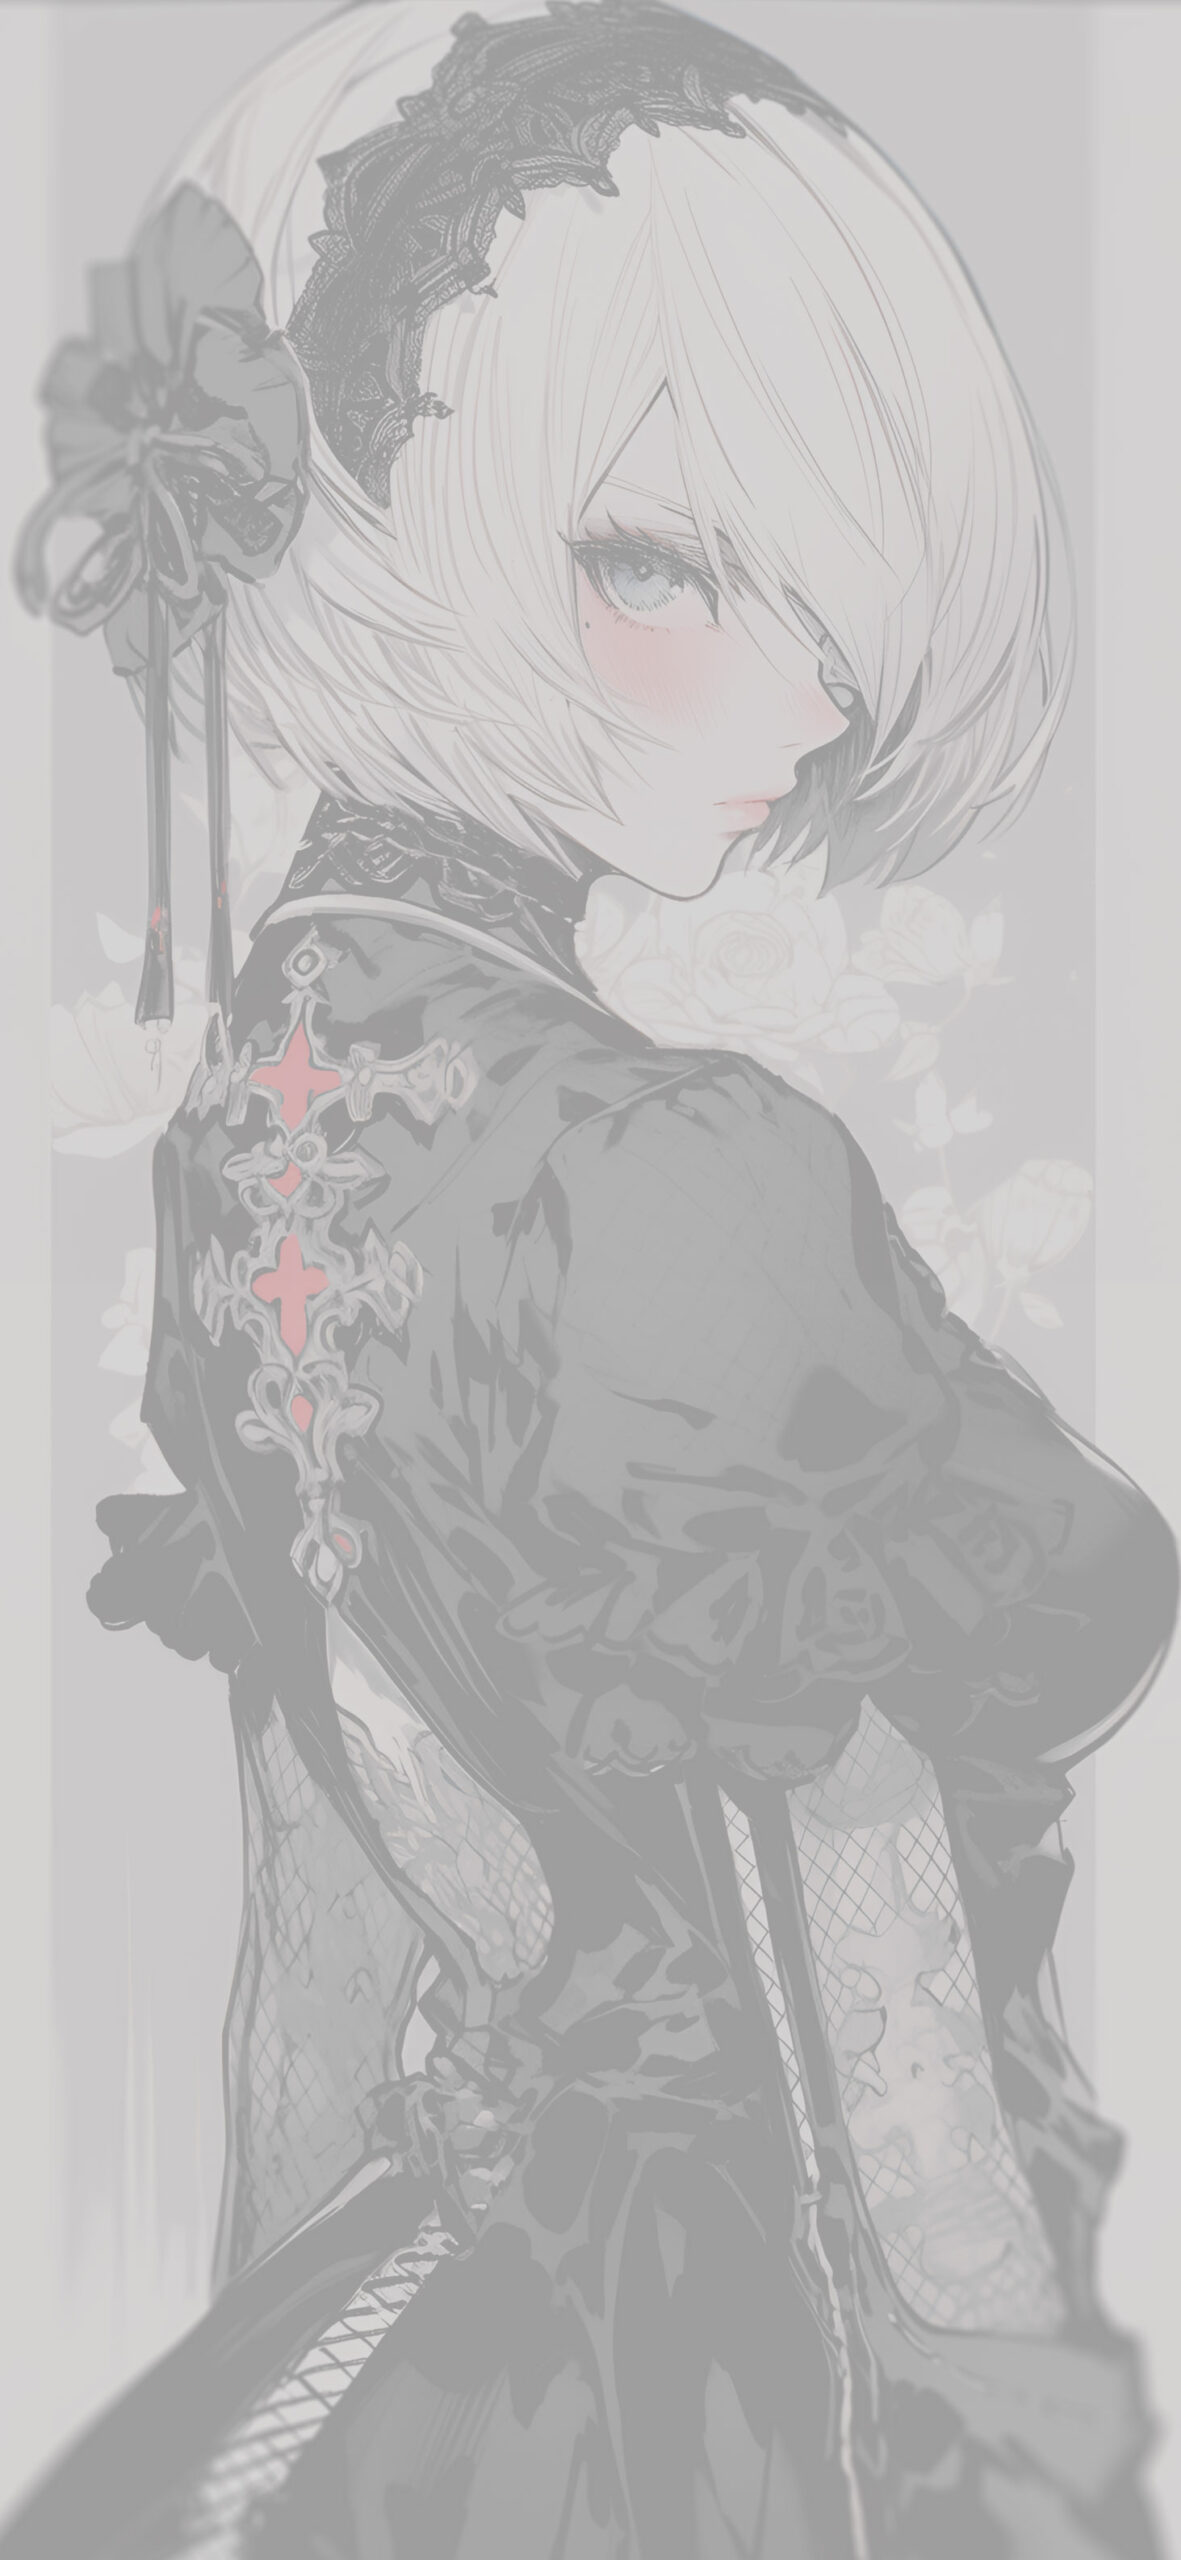 Yorha n 2 type b with intricate details wallpaper Cool anime w